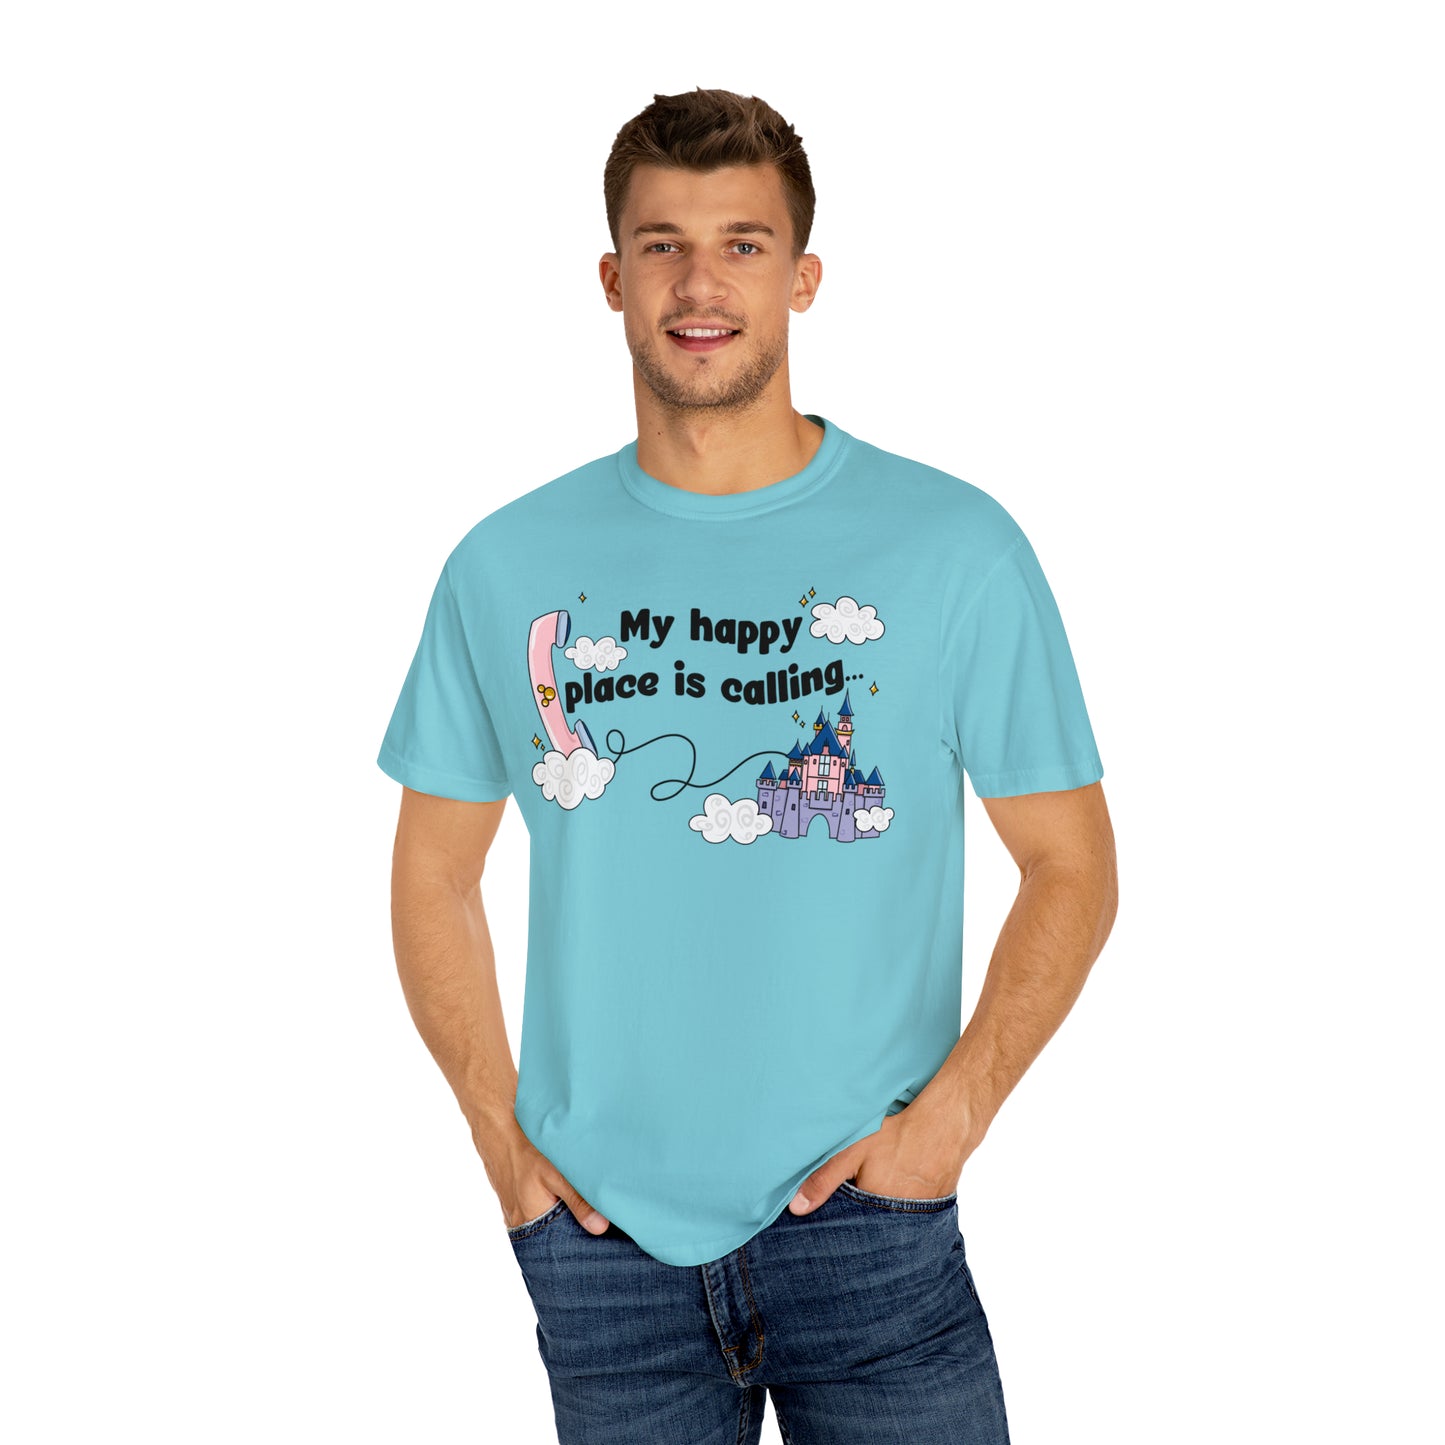 Adult Happy Place Calling, DL Tee - Comfort Colors